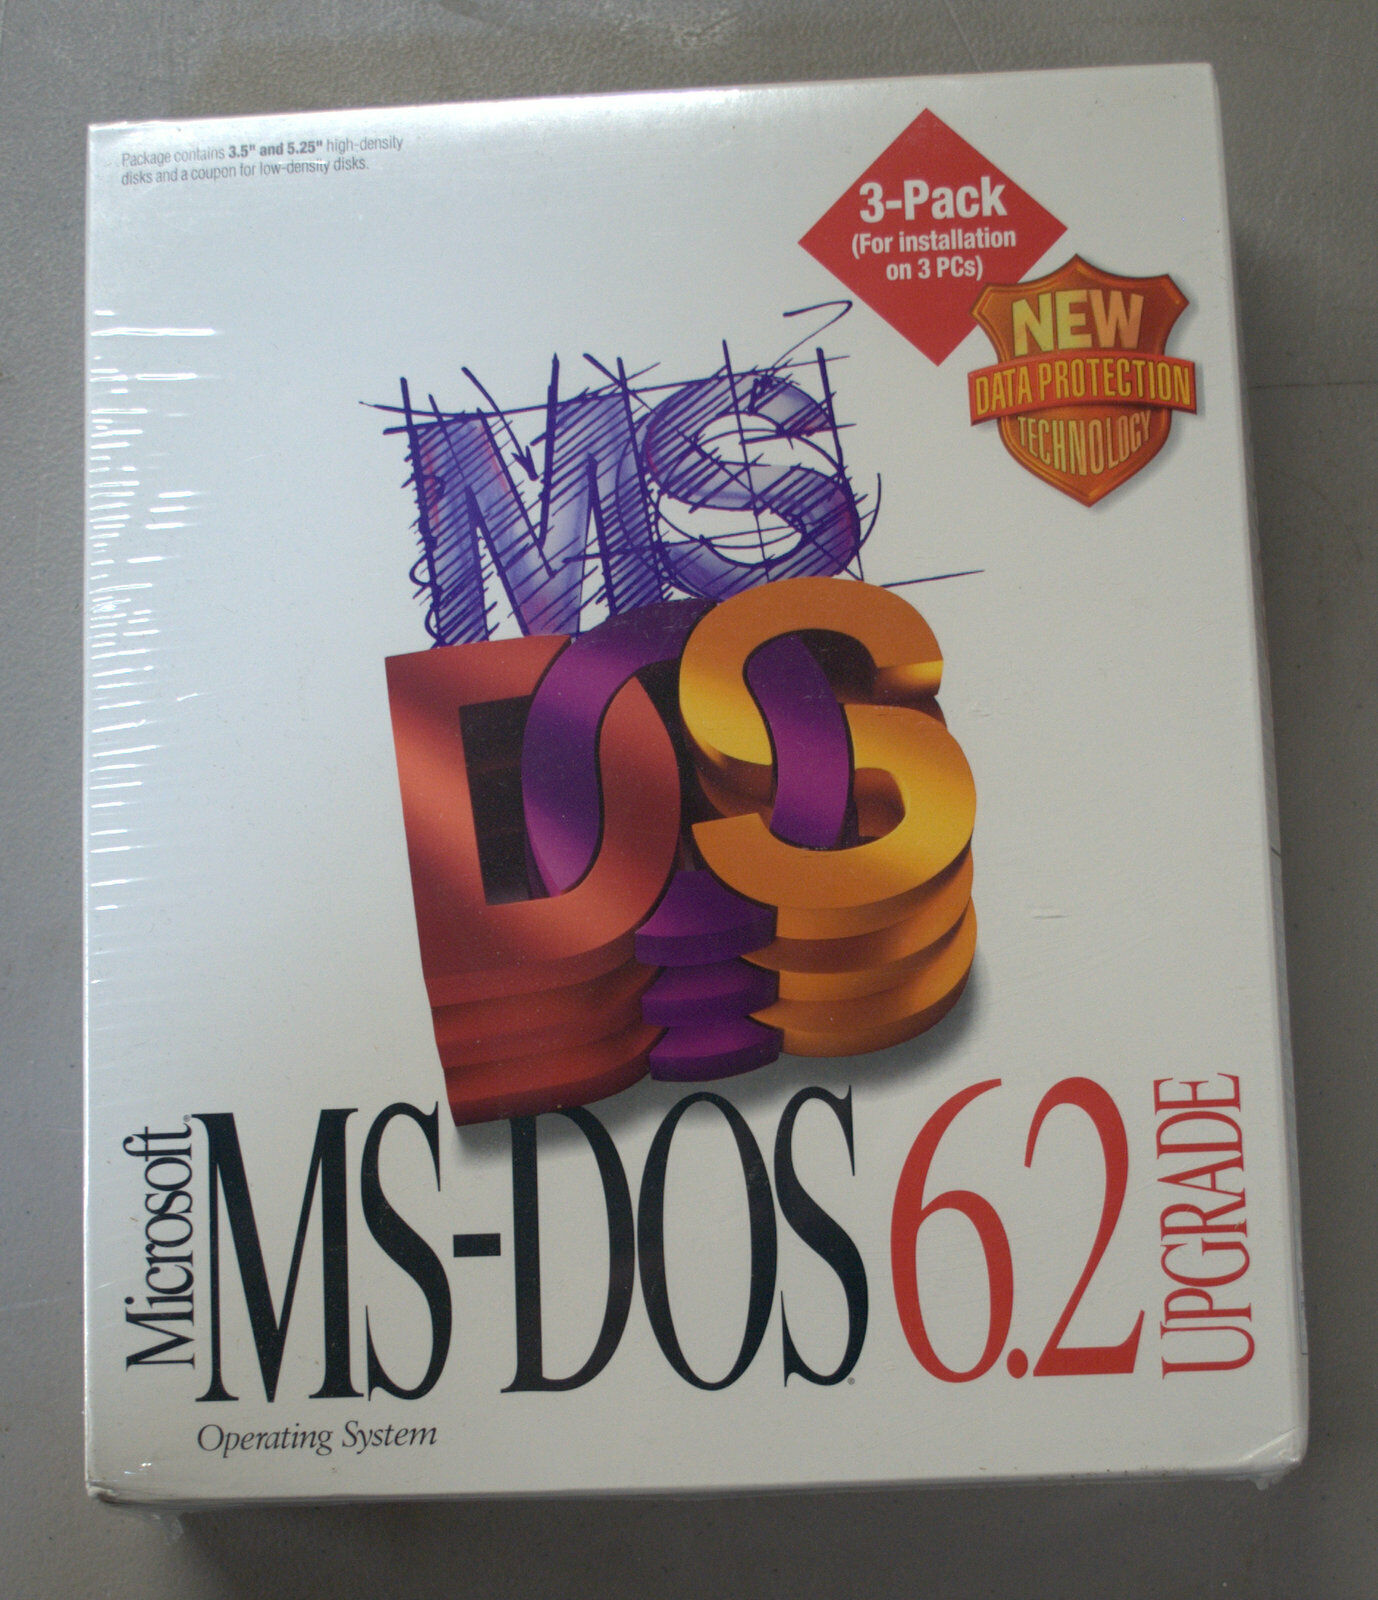 Microsoft MS-DOS Vrs 6.2  Software New in Package Limited time offer